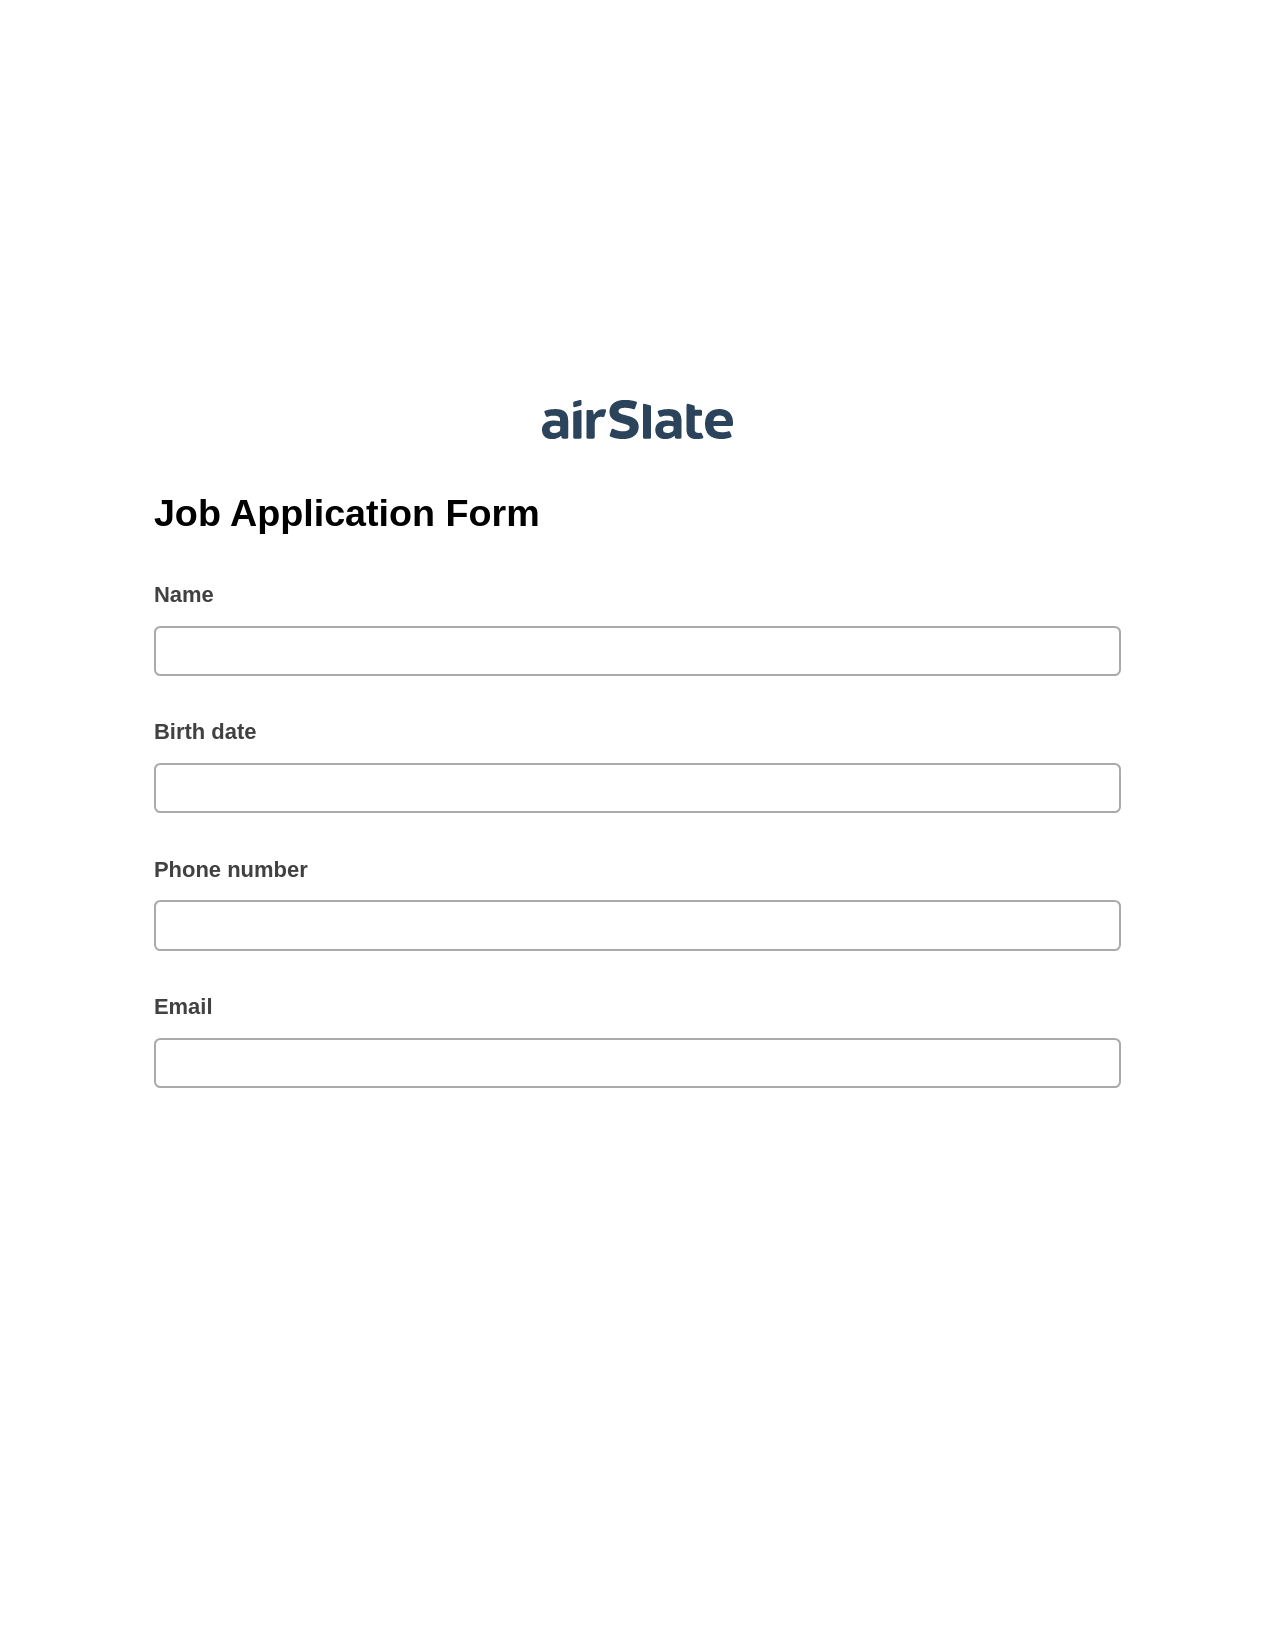 Job Application Form Pre-fill from Salesforce Record Bot, Email Notification Bot, Export to Salesforce Bot